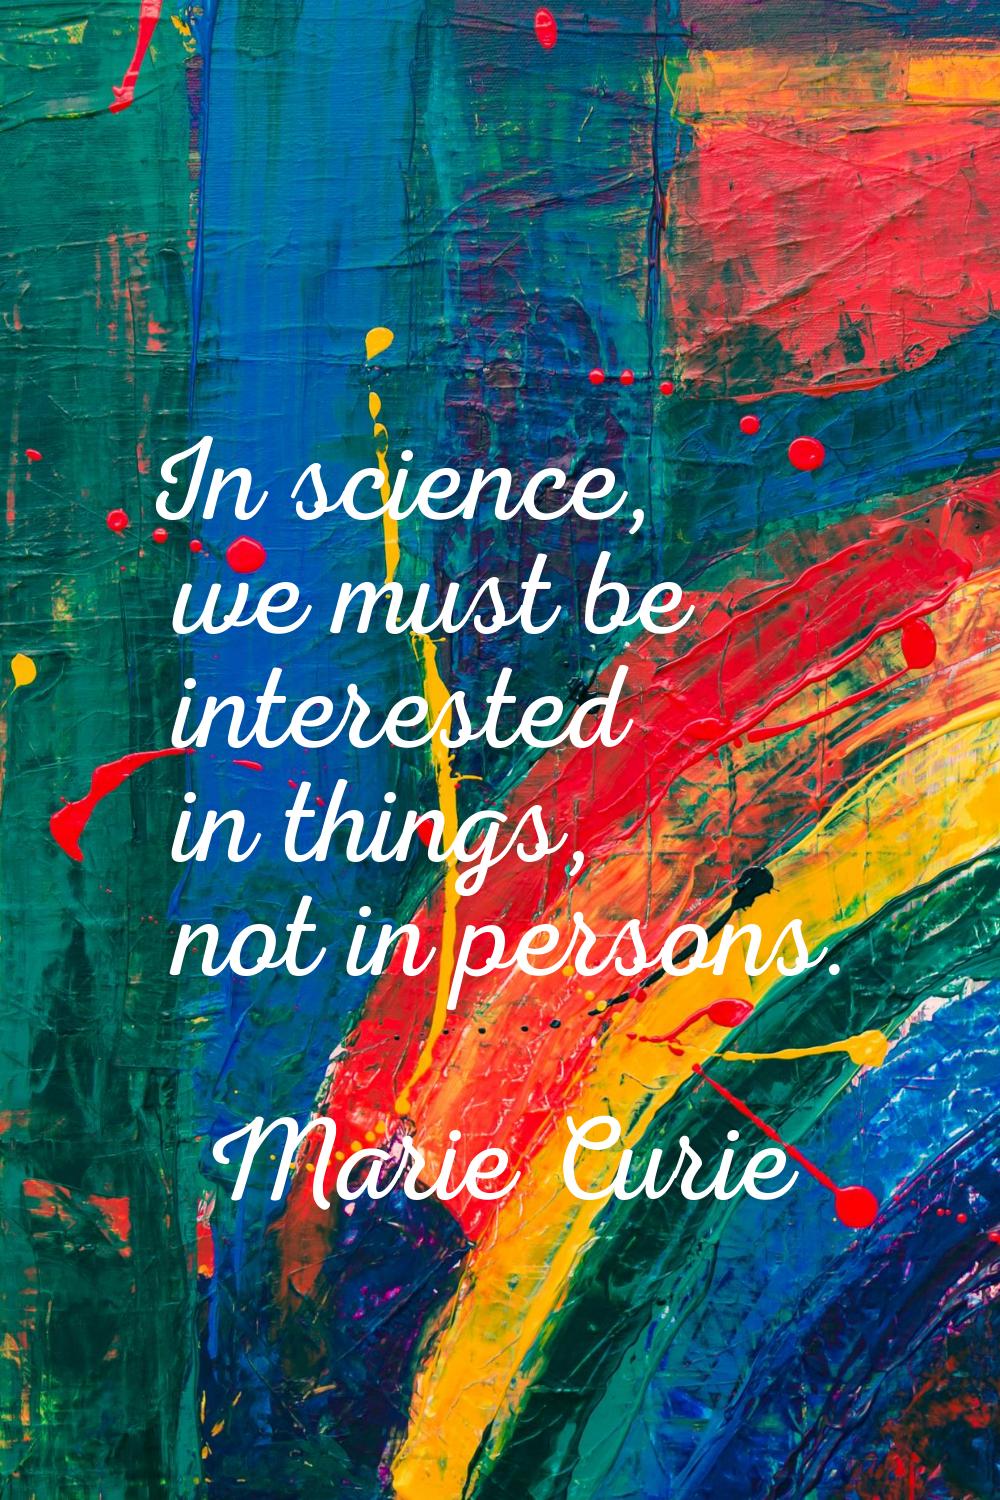 In science, we must be interested in things, not in persons.